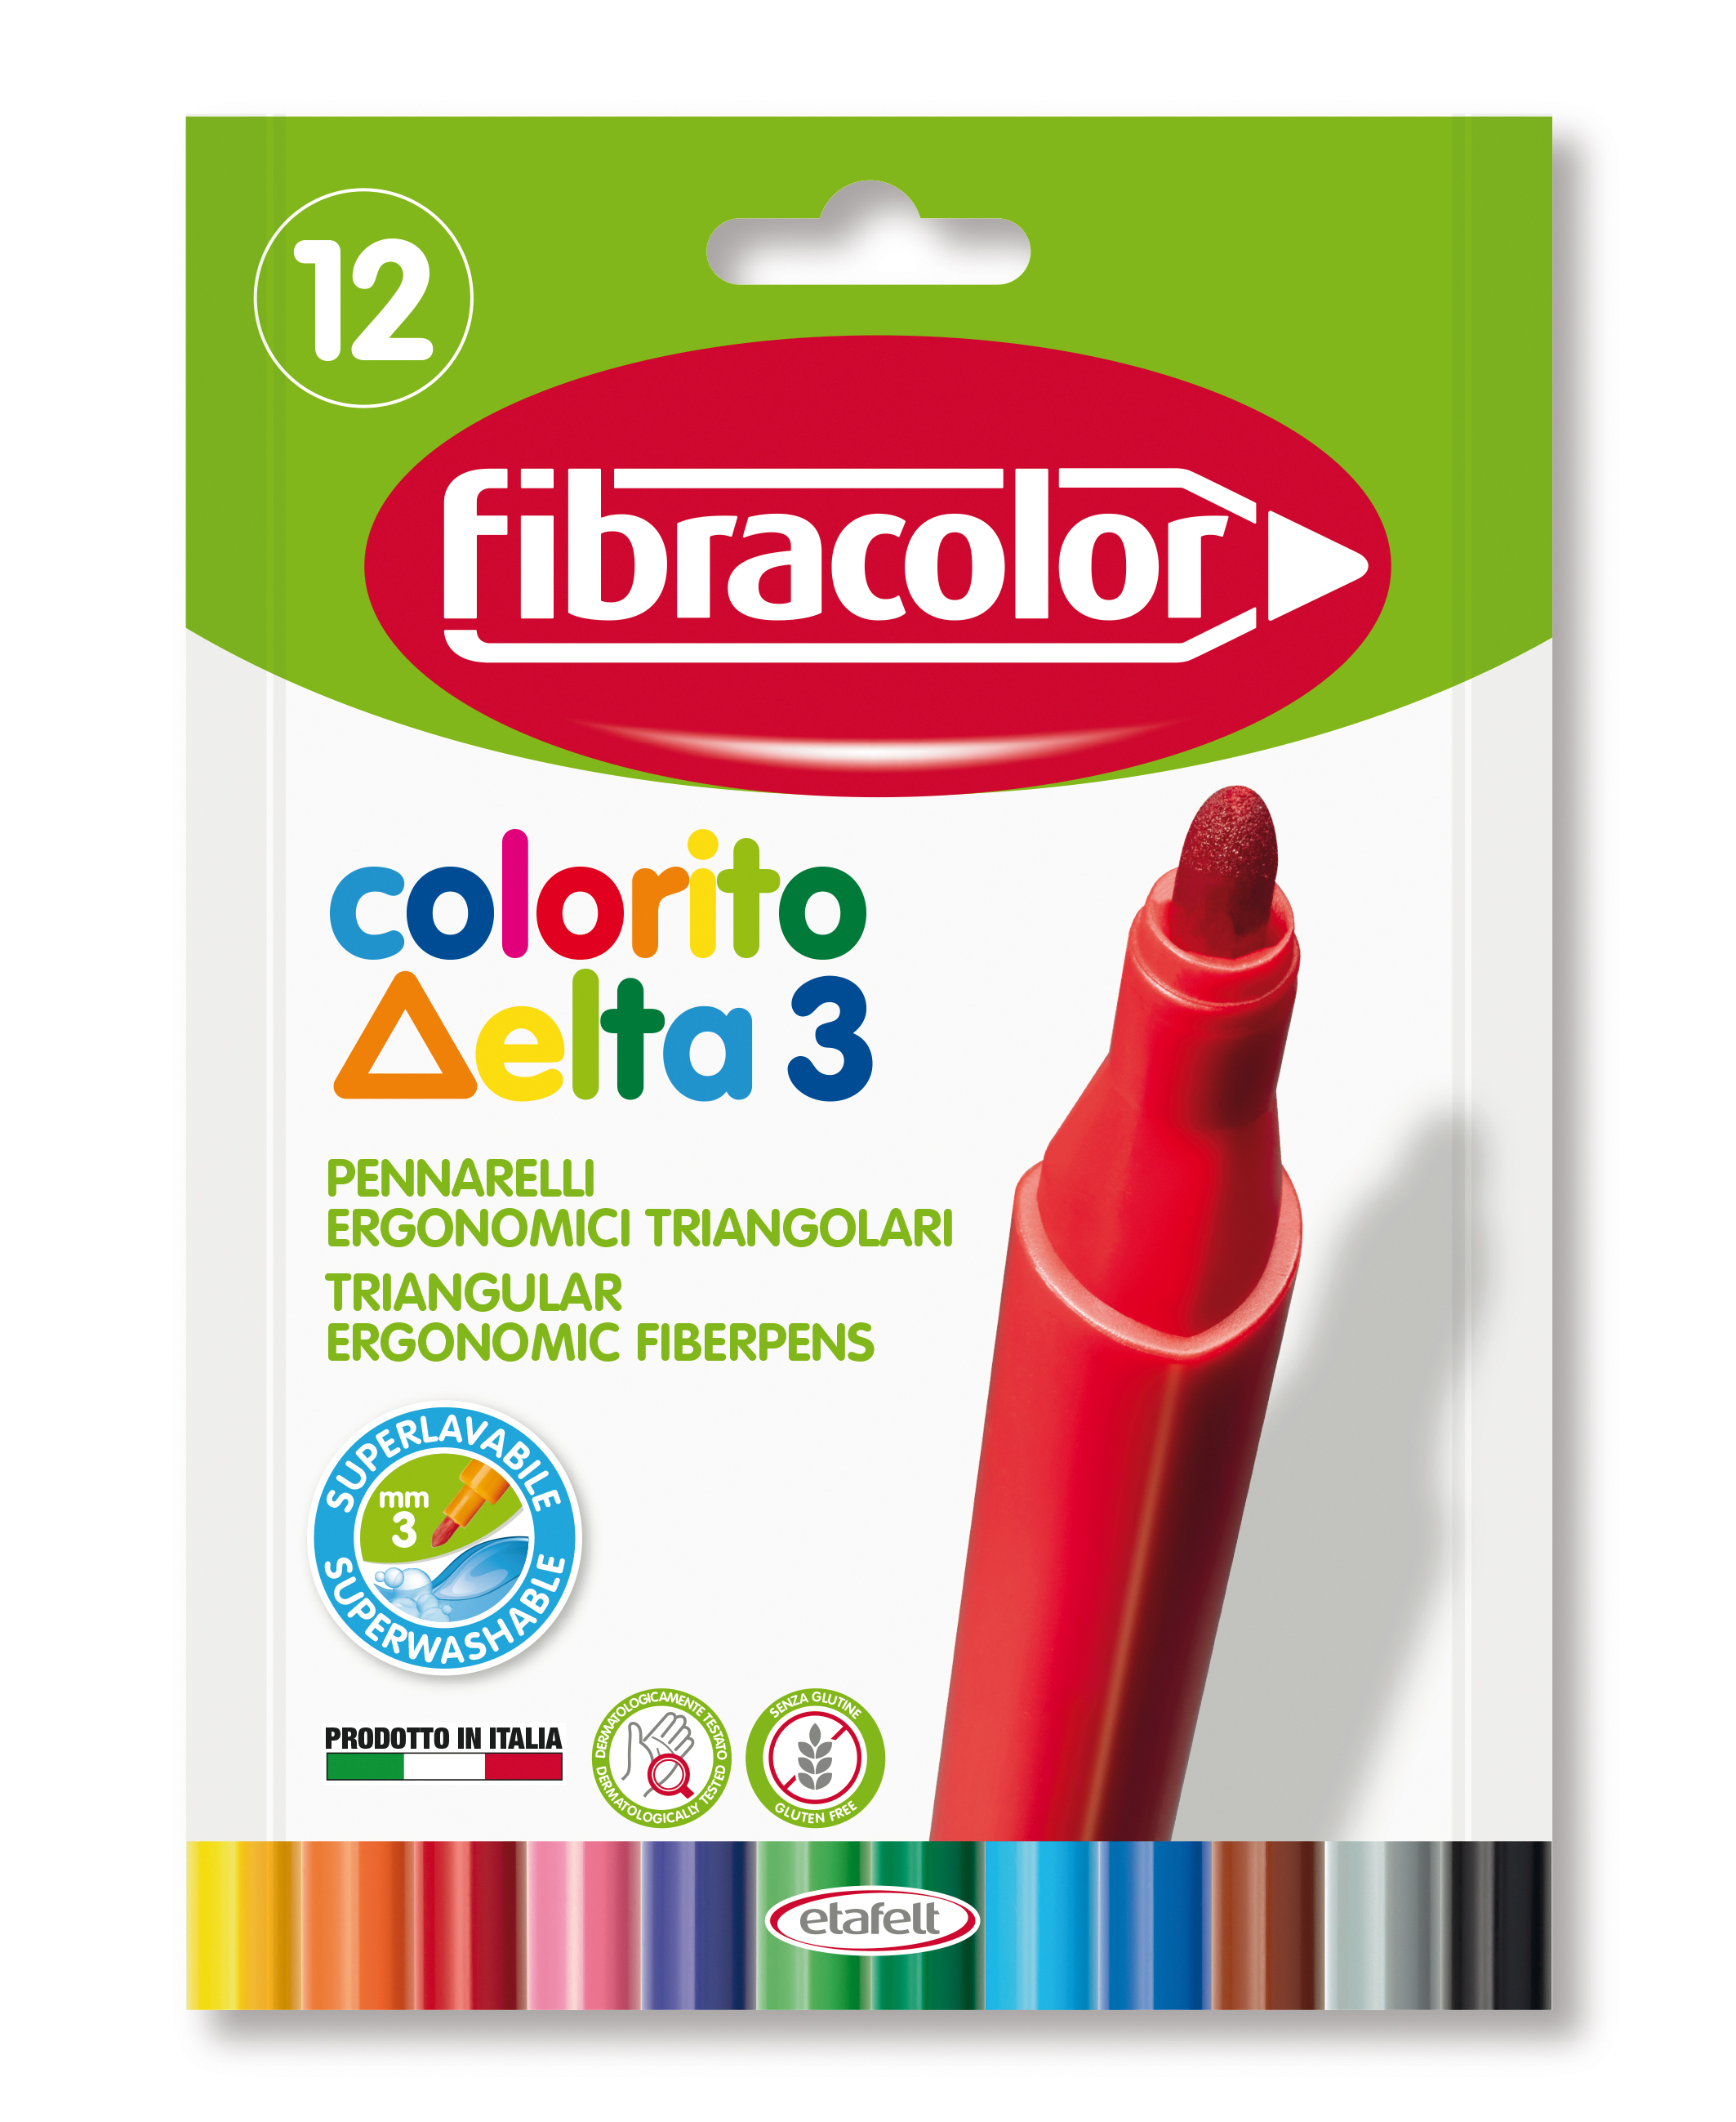 Etafelt is pens and markers with Fibracolor and Hi-Text